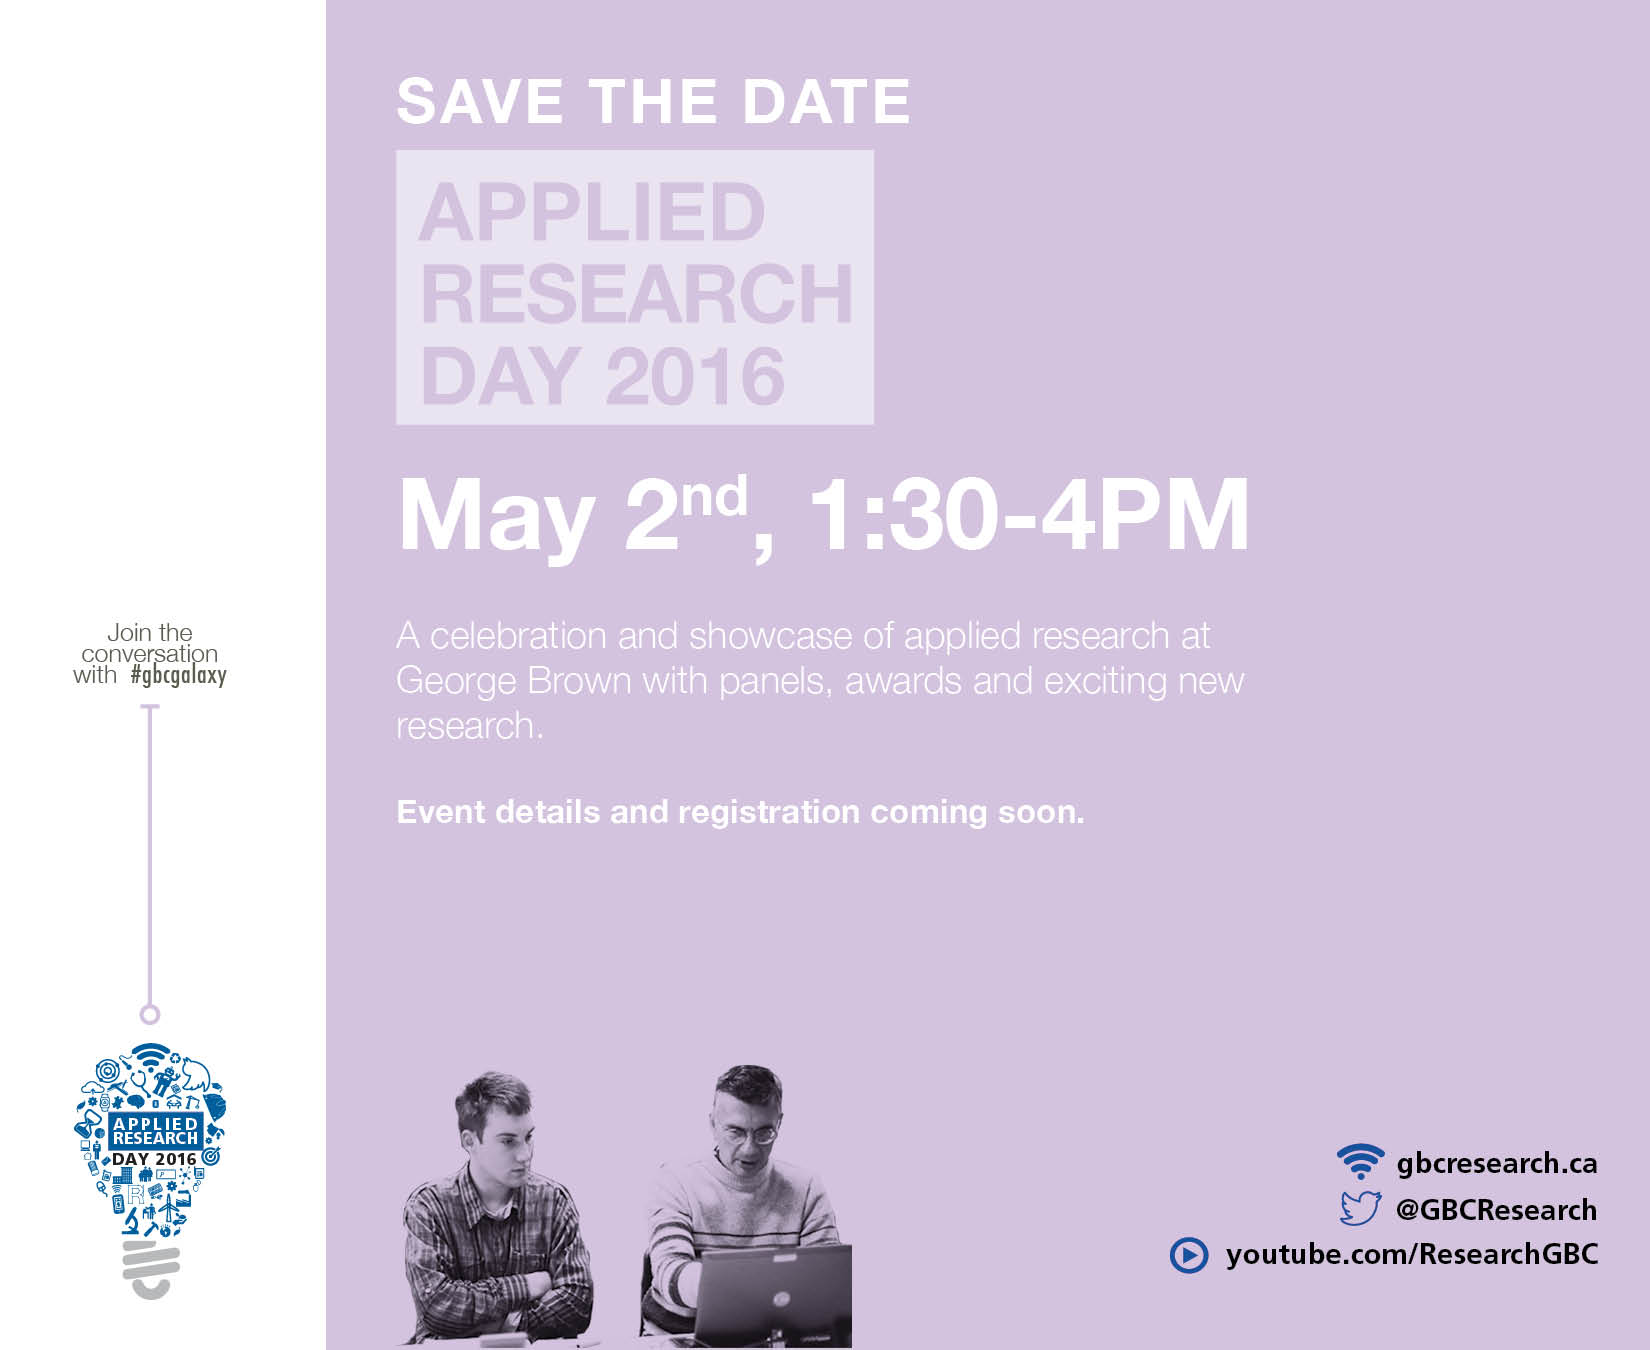 SaveTheDate_AppliedResearchDay20162